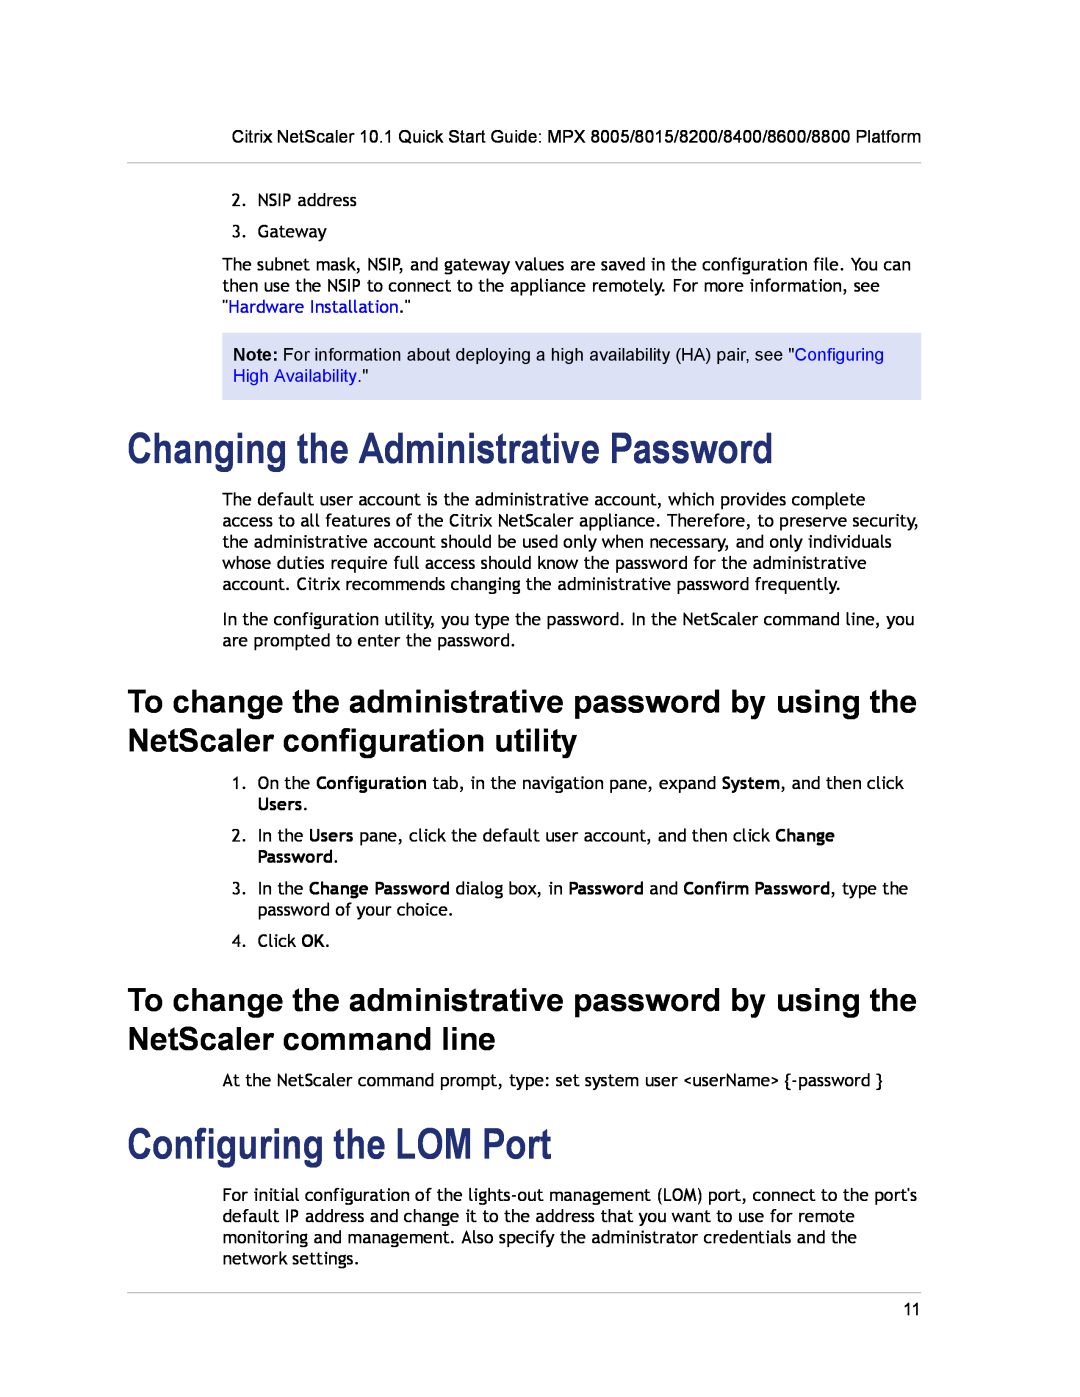 Citrix Systems 8015, 8800, 8600, 8200, 8005, 8400 quick start Changing the Administrative Password, Configuring the LOM Port 